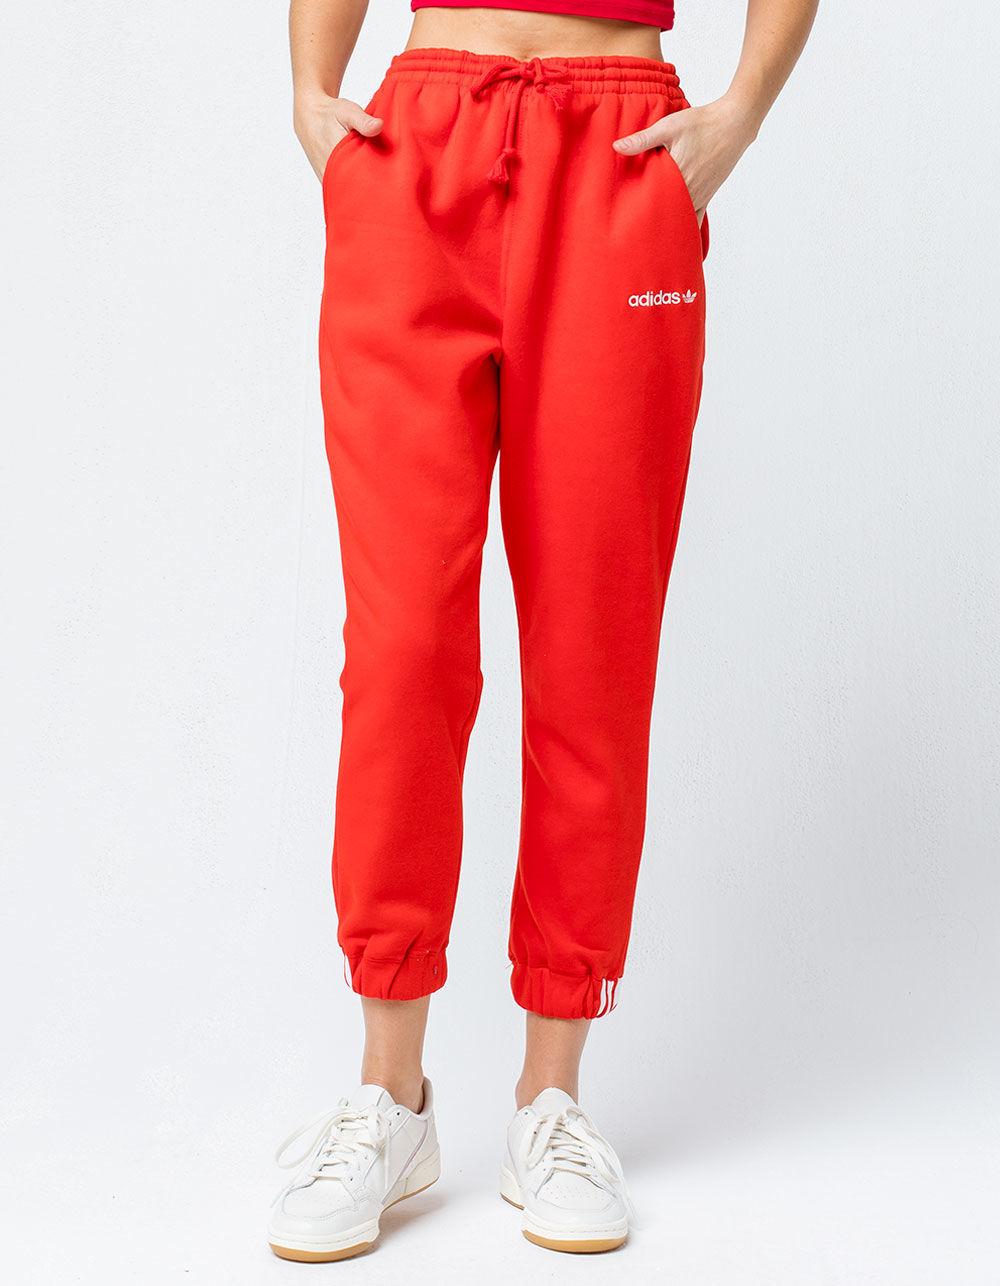 red adidas trousers womens